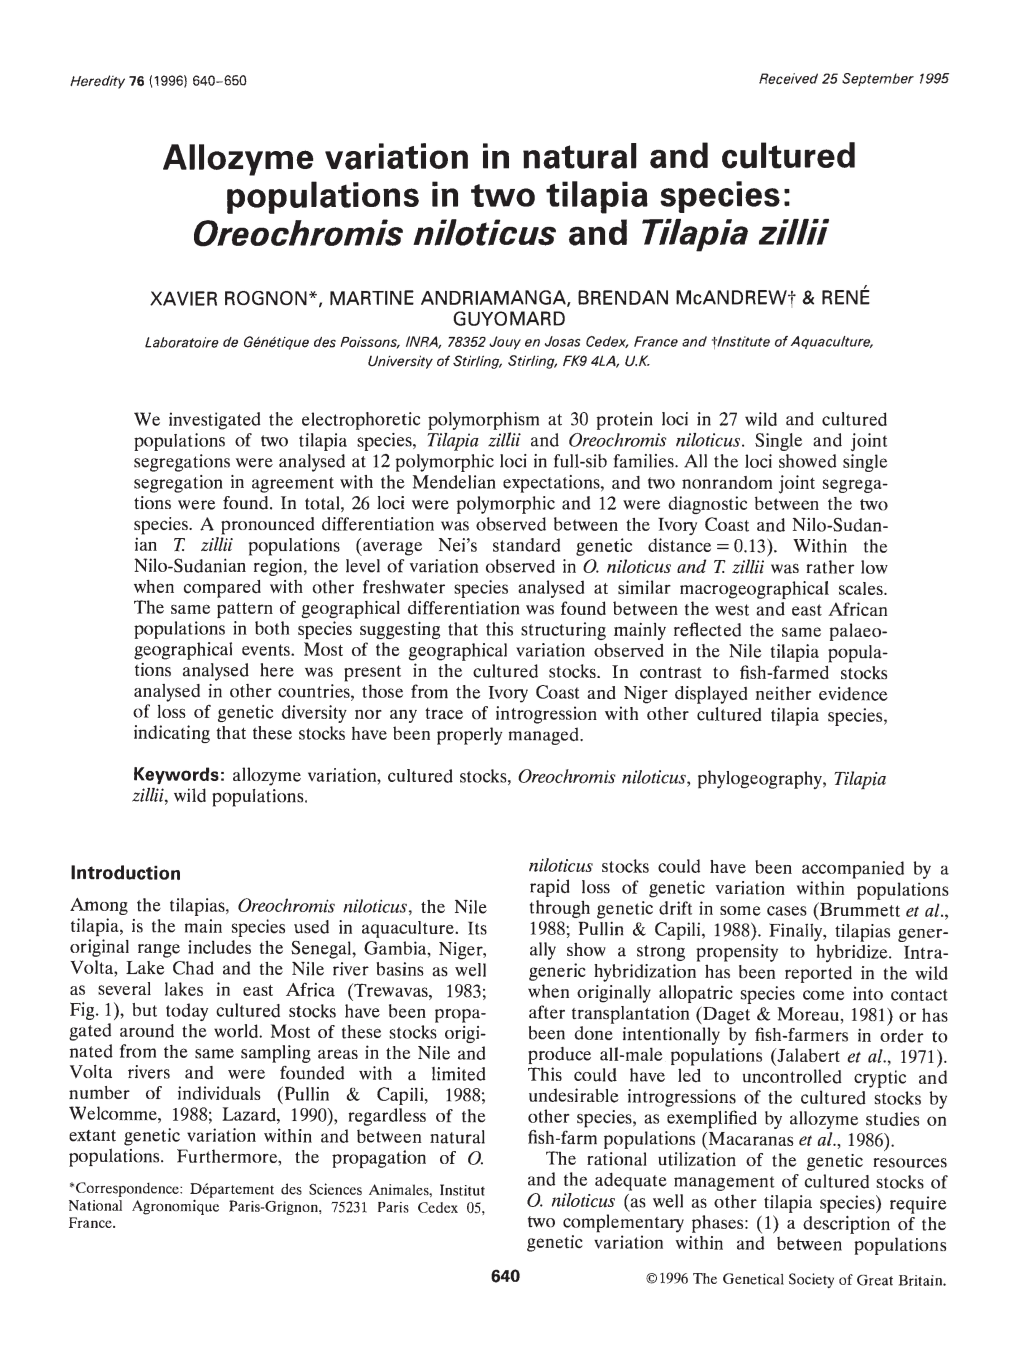 Allozyme Variation in Natural and Cultured Populations in Two Tilapia Species: Oreochromis Niloticus a N D Tilapia Zulu